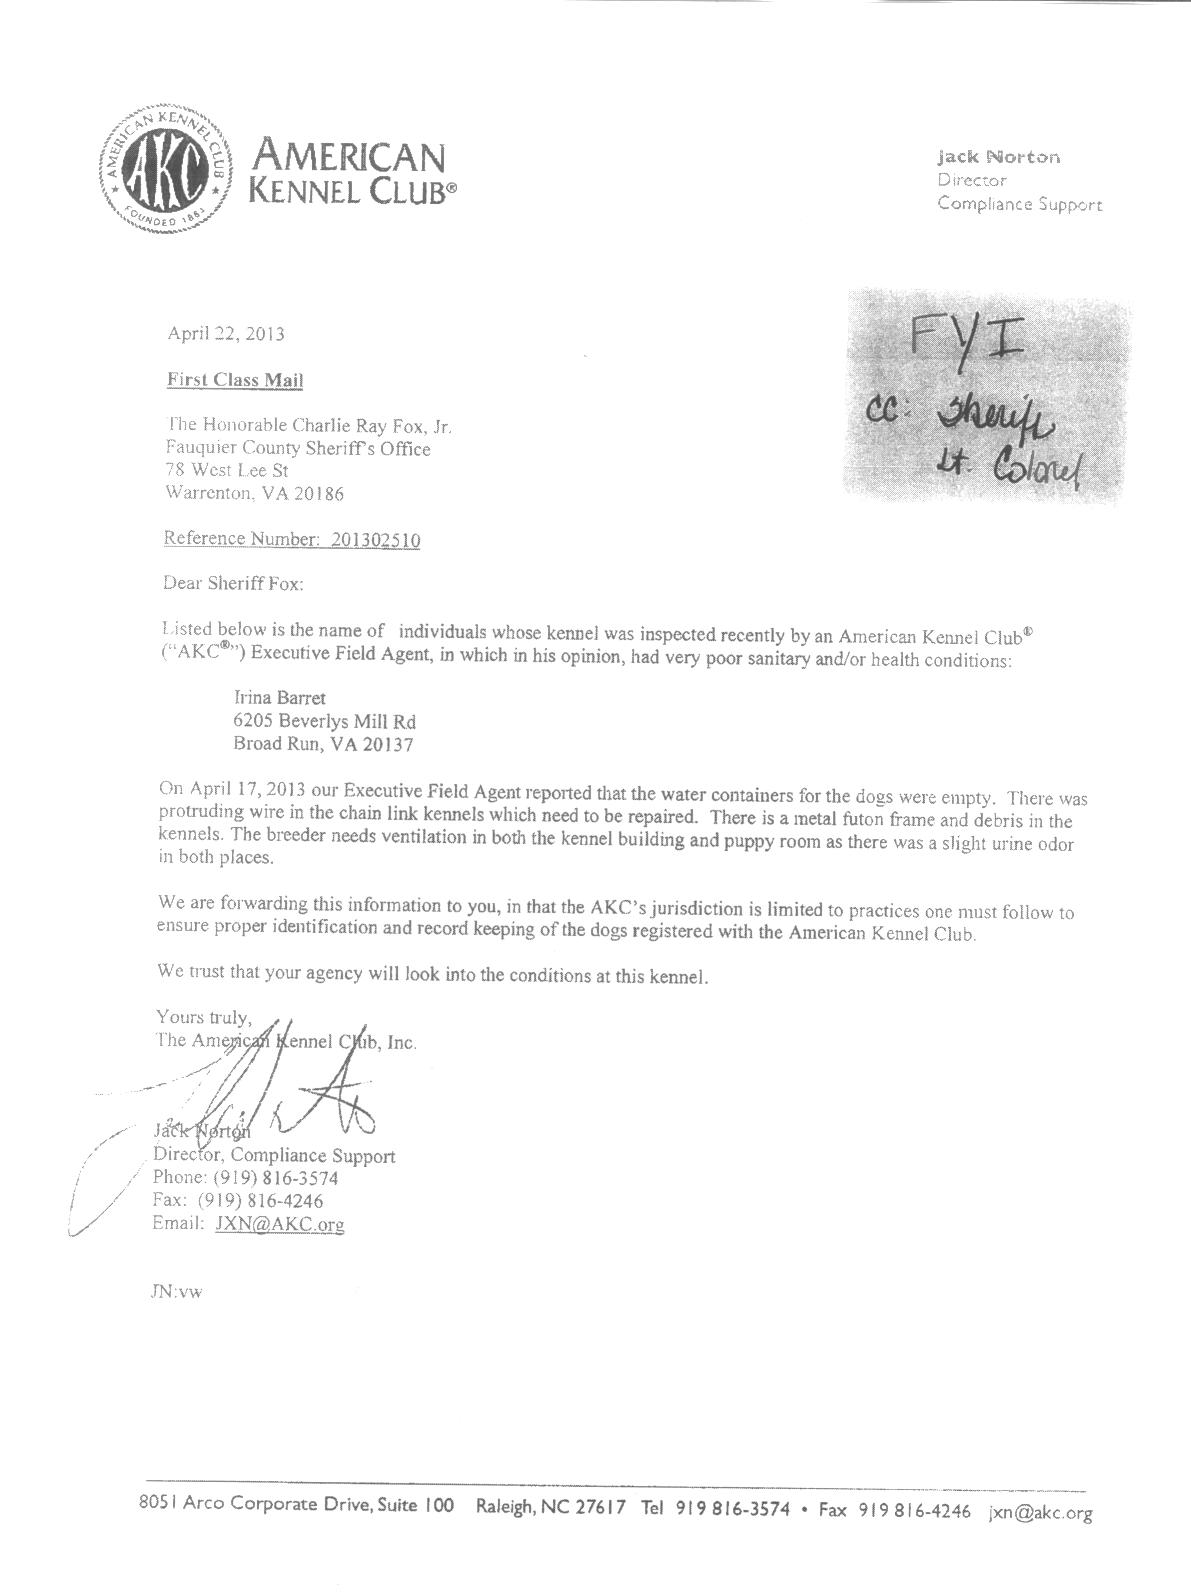 Letter from AKC to local sheriff about Irina Barett's kennel